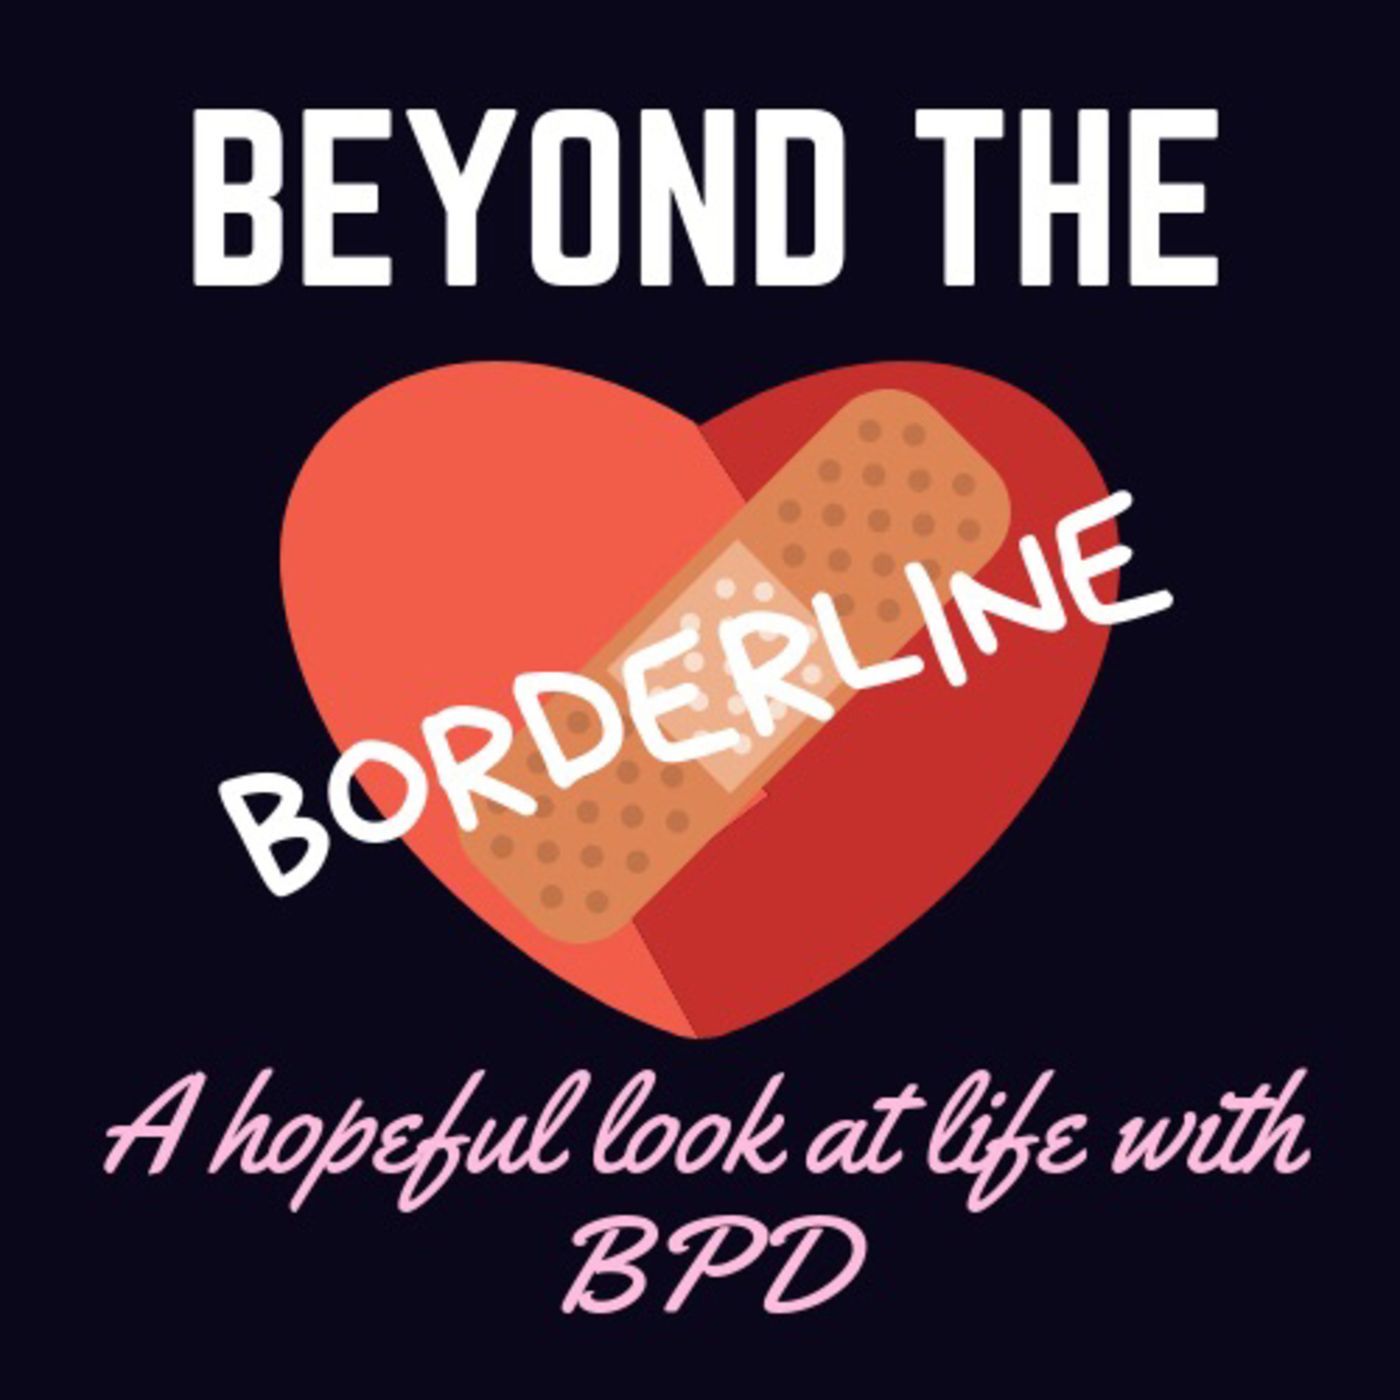 Beyond the Borderline - Advocacy, creativity and BPD - an interview with mental health blogger Gabby